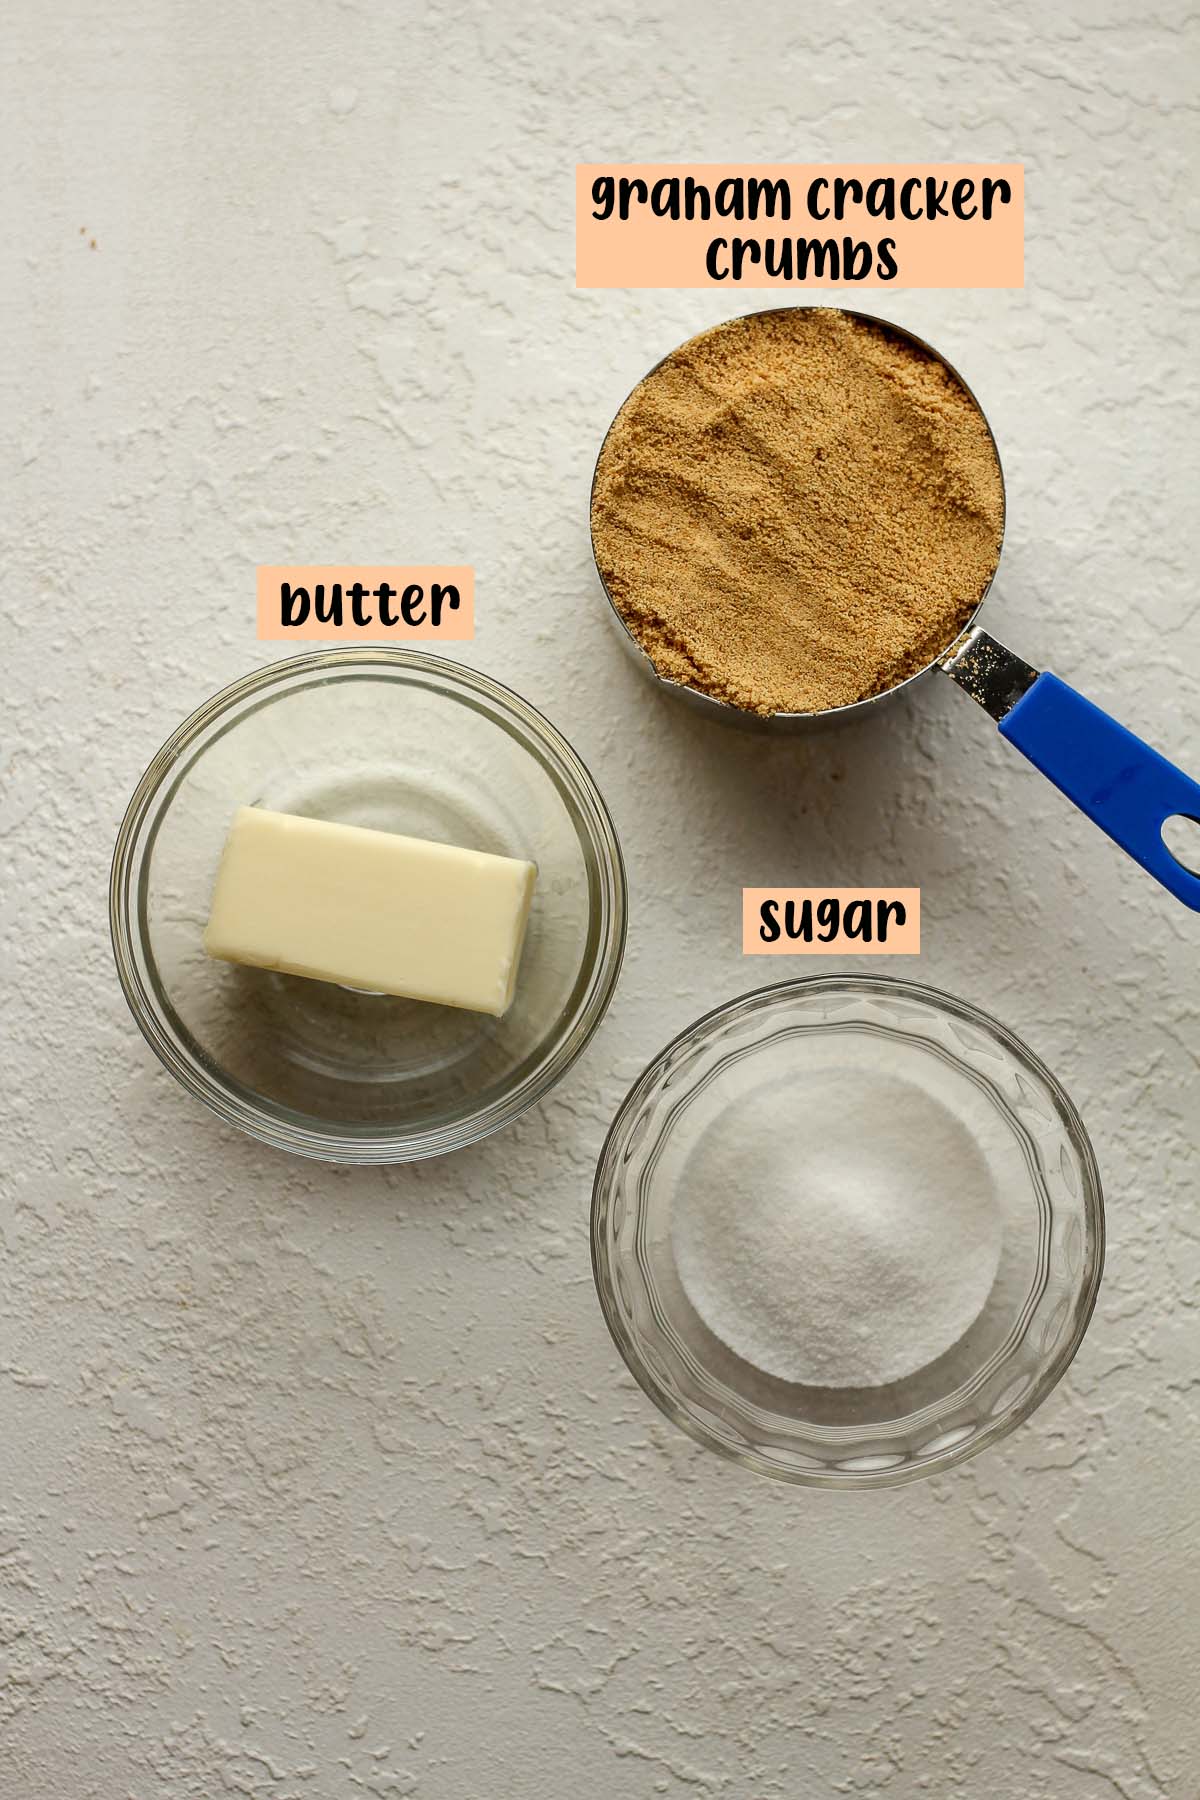 Ingredients for the graham cracker crust.